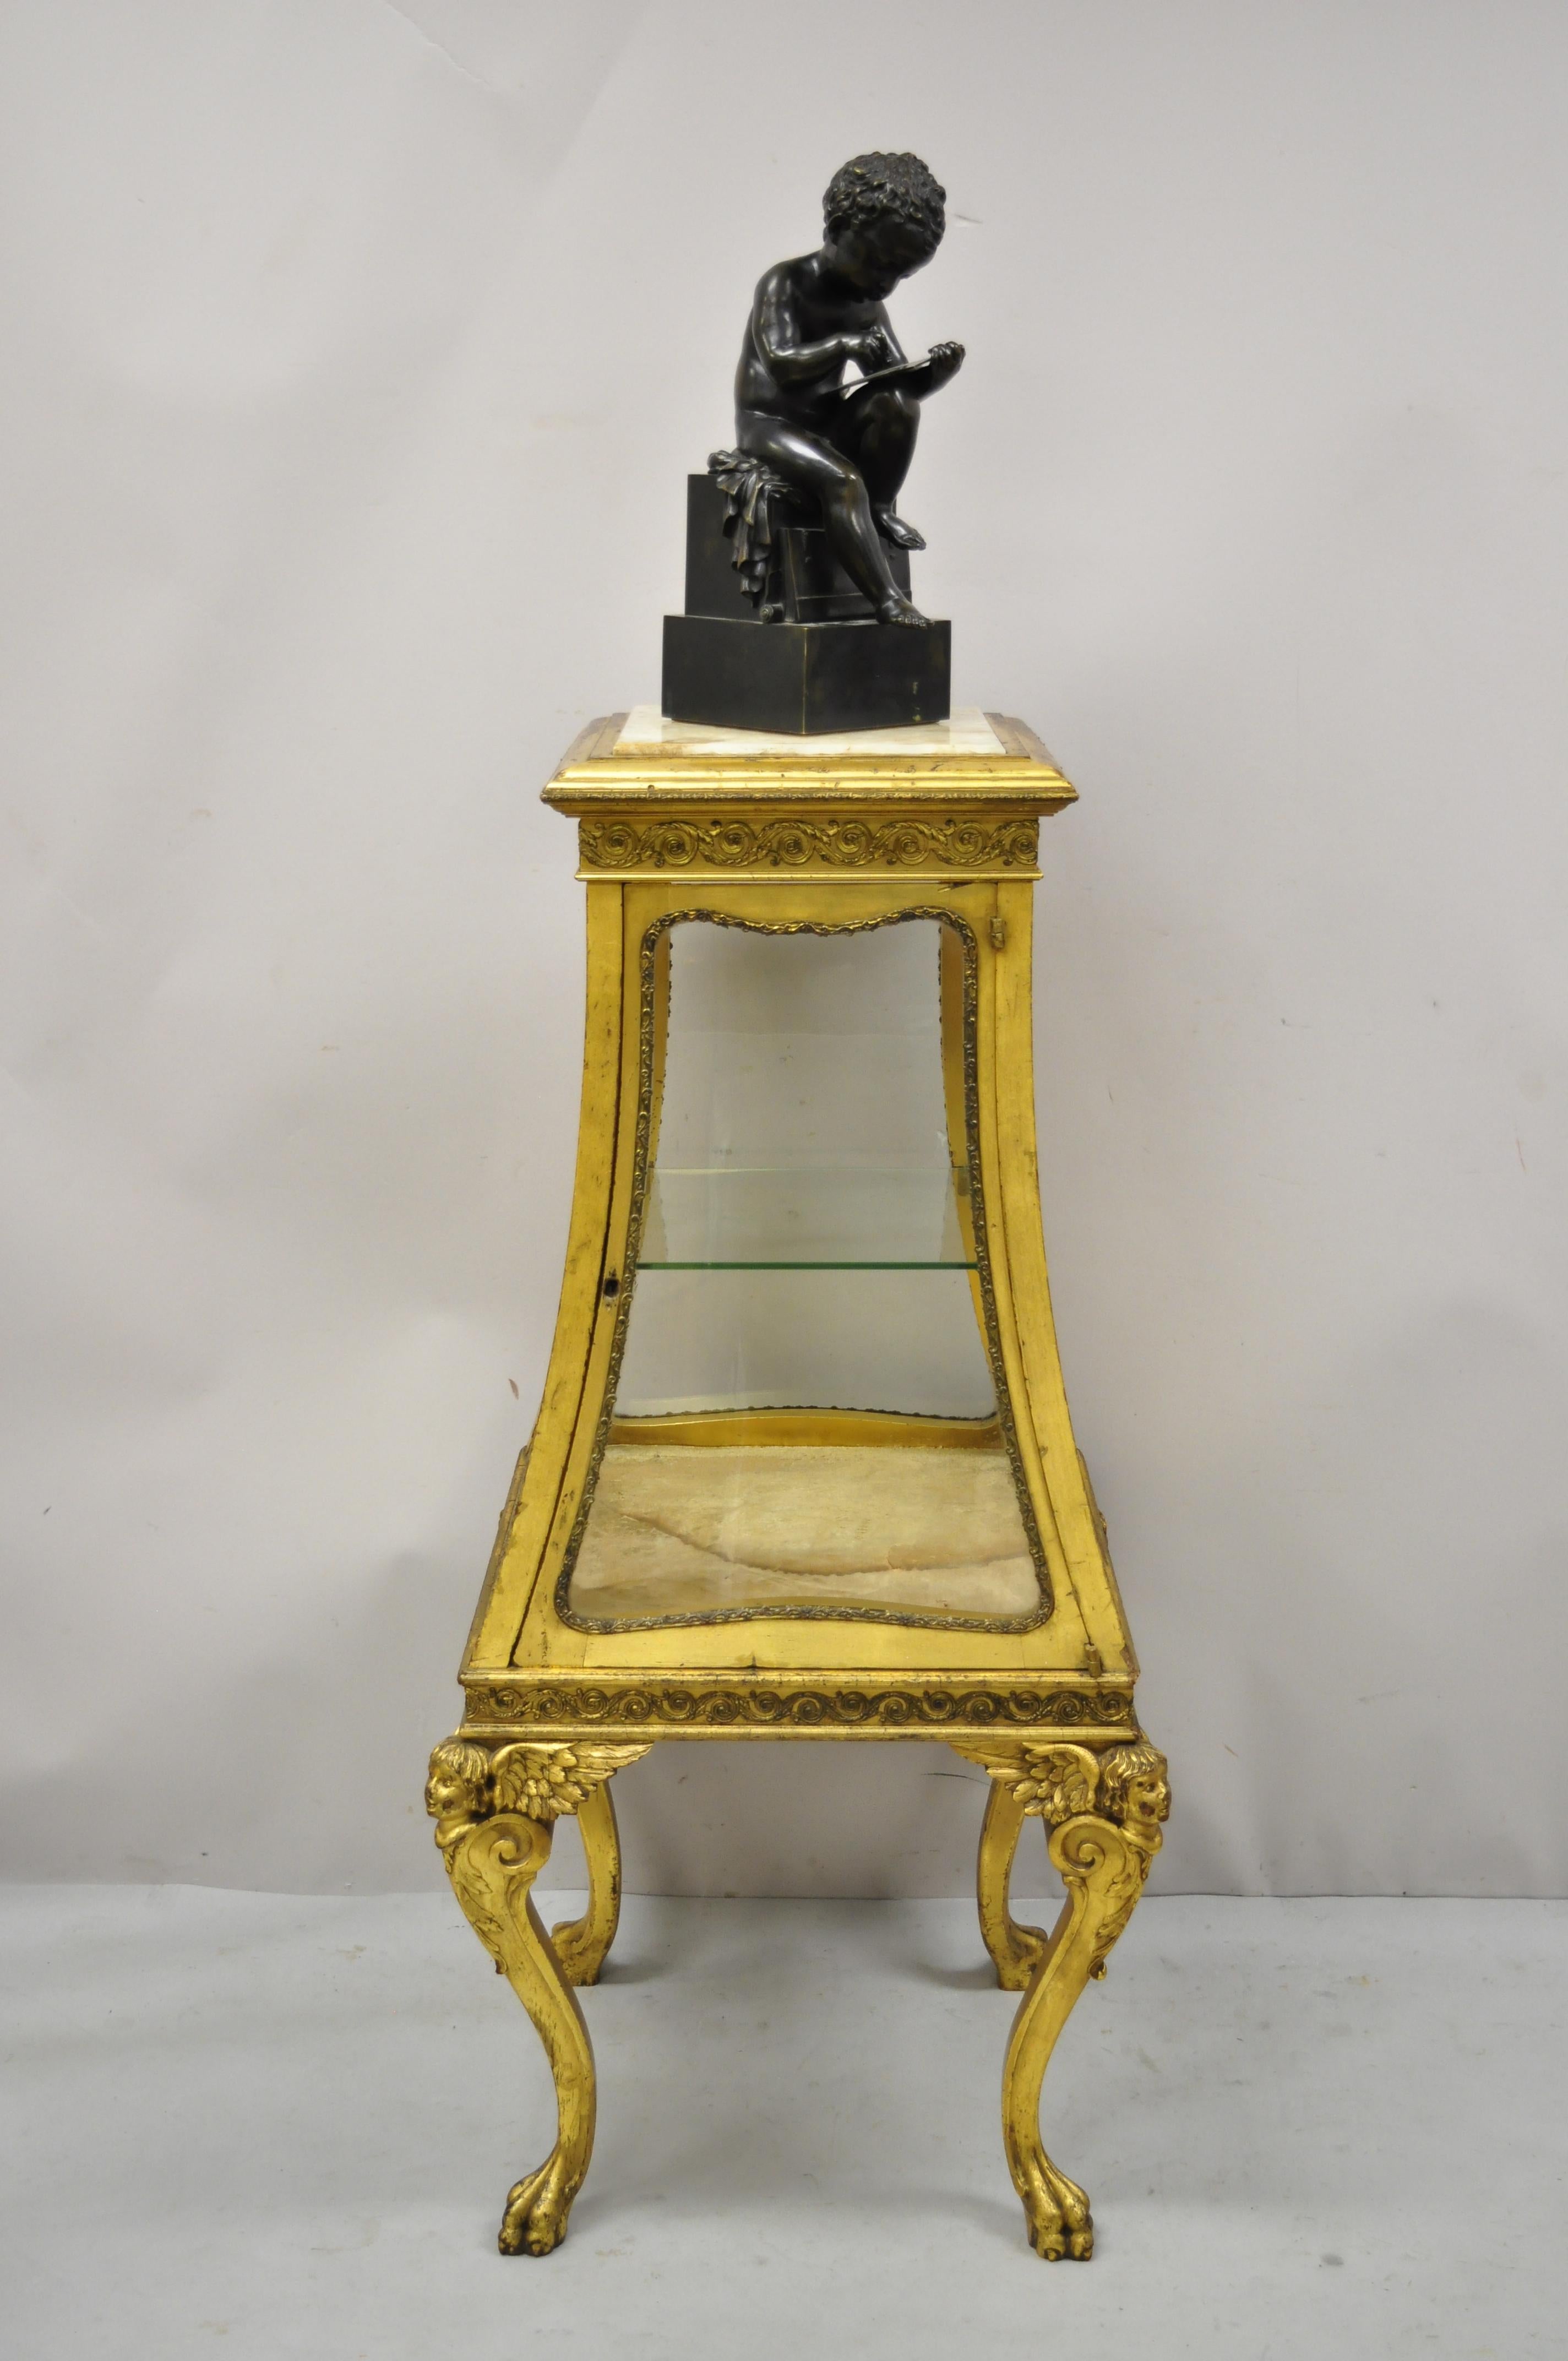 Antique 19th century French empire winged cherub gold gilt vitrine curio display cabinet pedestal with onyx top. Item features onyx stone top, angel/cherub legs with wings, paw feet, distressed gold gilt finish, glass on all sides, 1 swing door, no